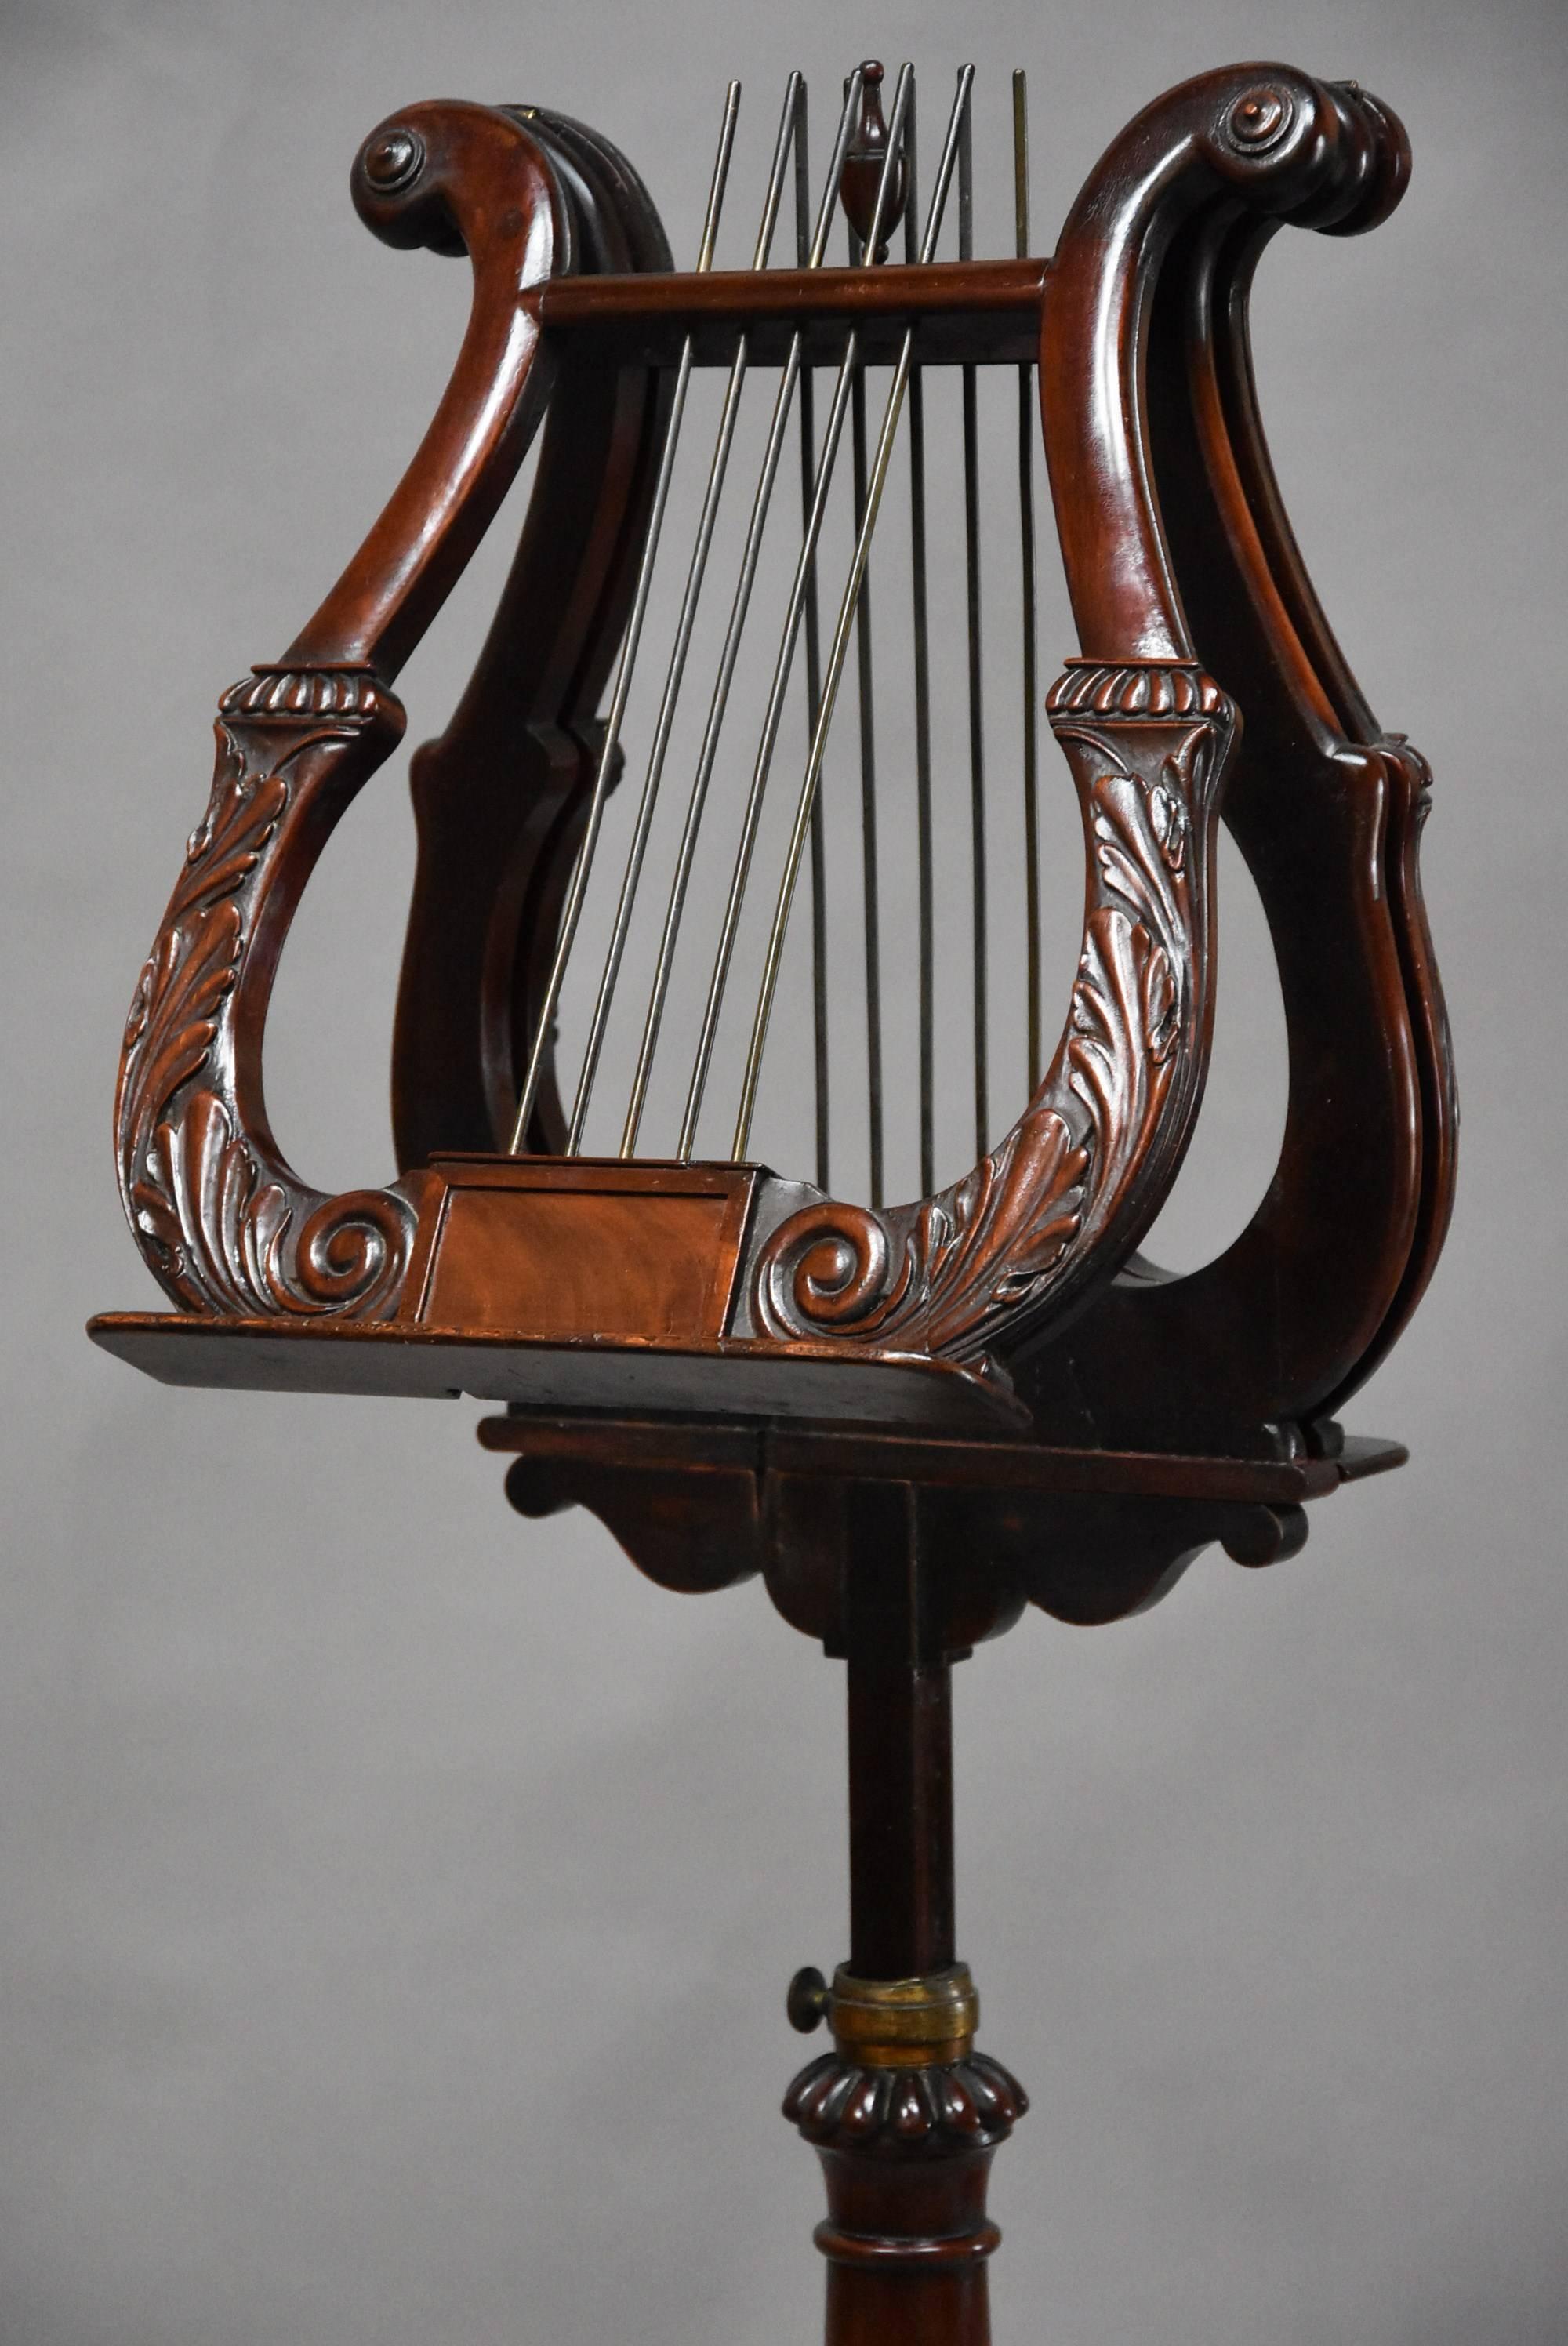 A late Regency mahogany lyre duet music stand of excellent quality.

This duet stand consists of two finely carved adjustable lyre supports with applied paterae to the top, gadrooned carving with scrolling leaf decoration below with central panel